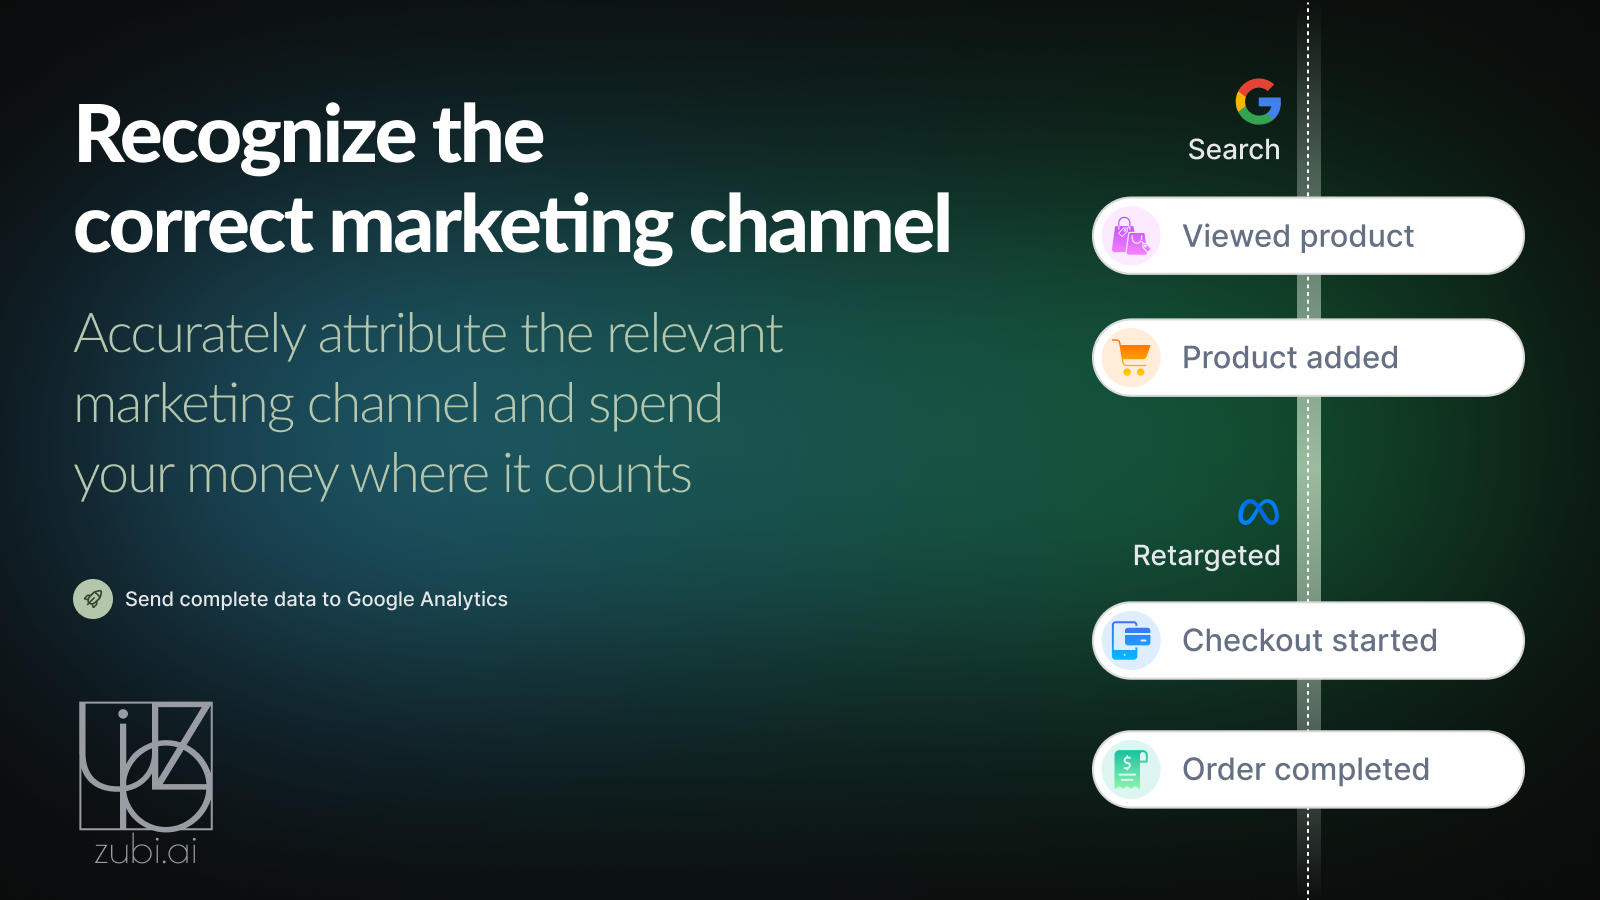 Recognize the correct marketing channel